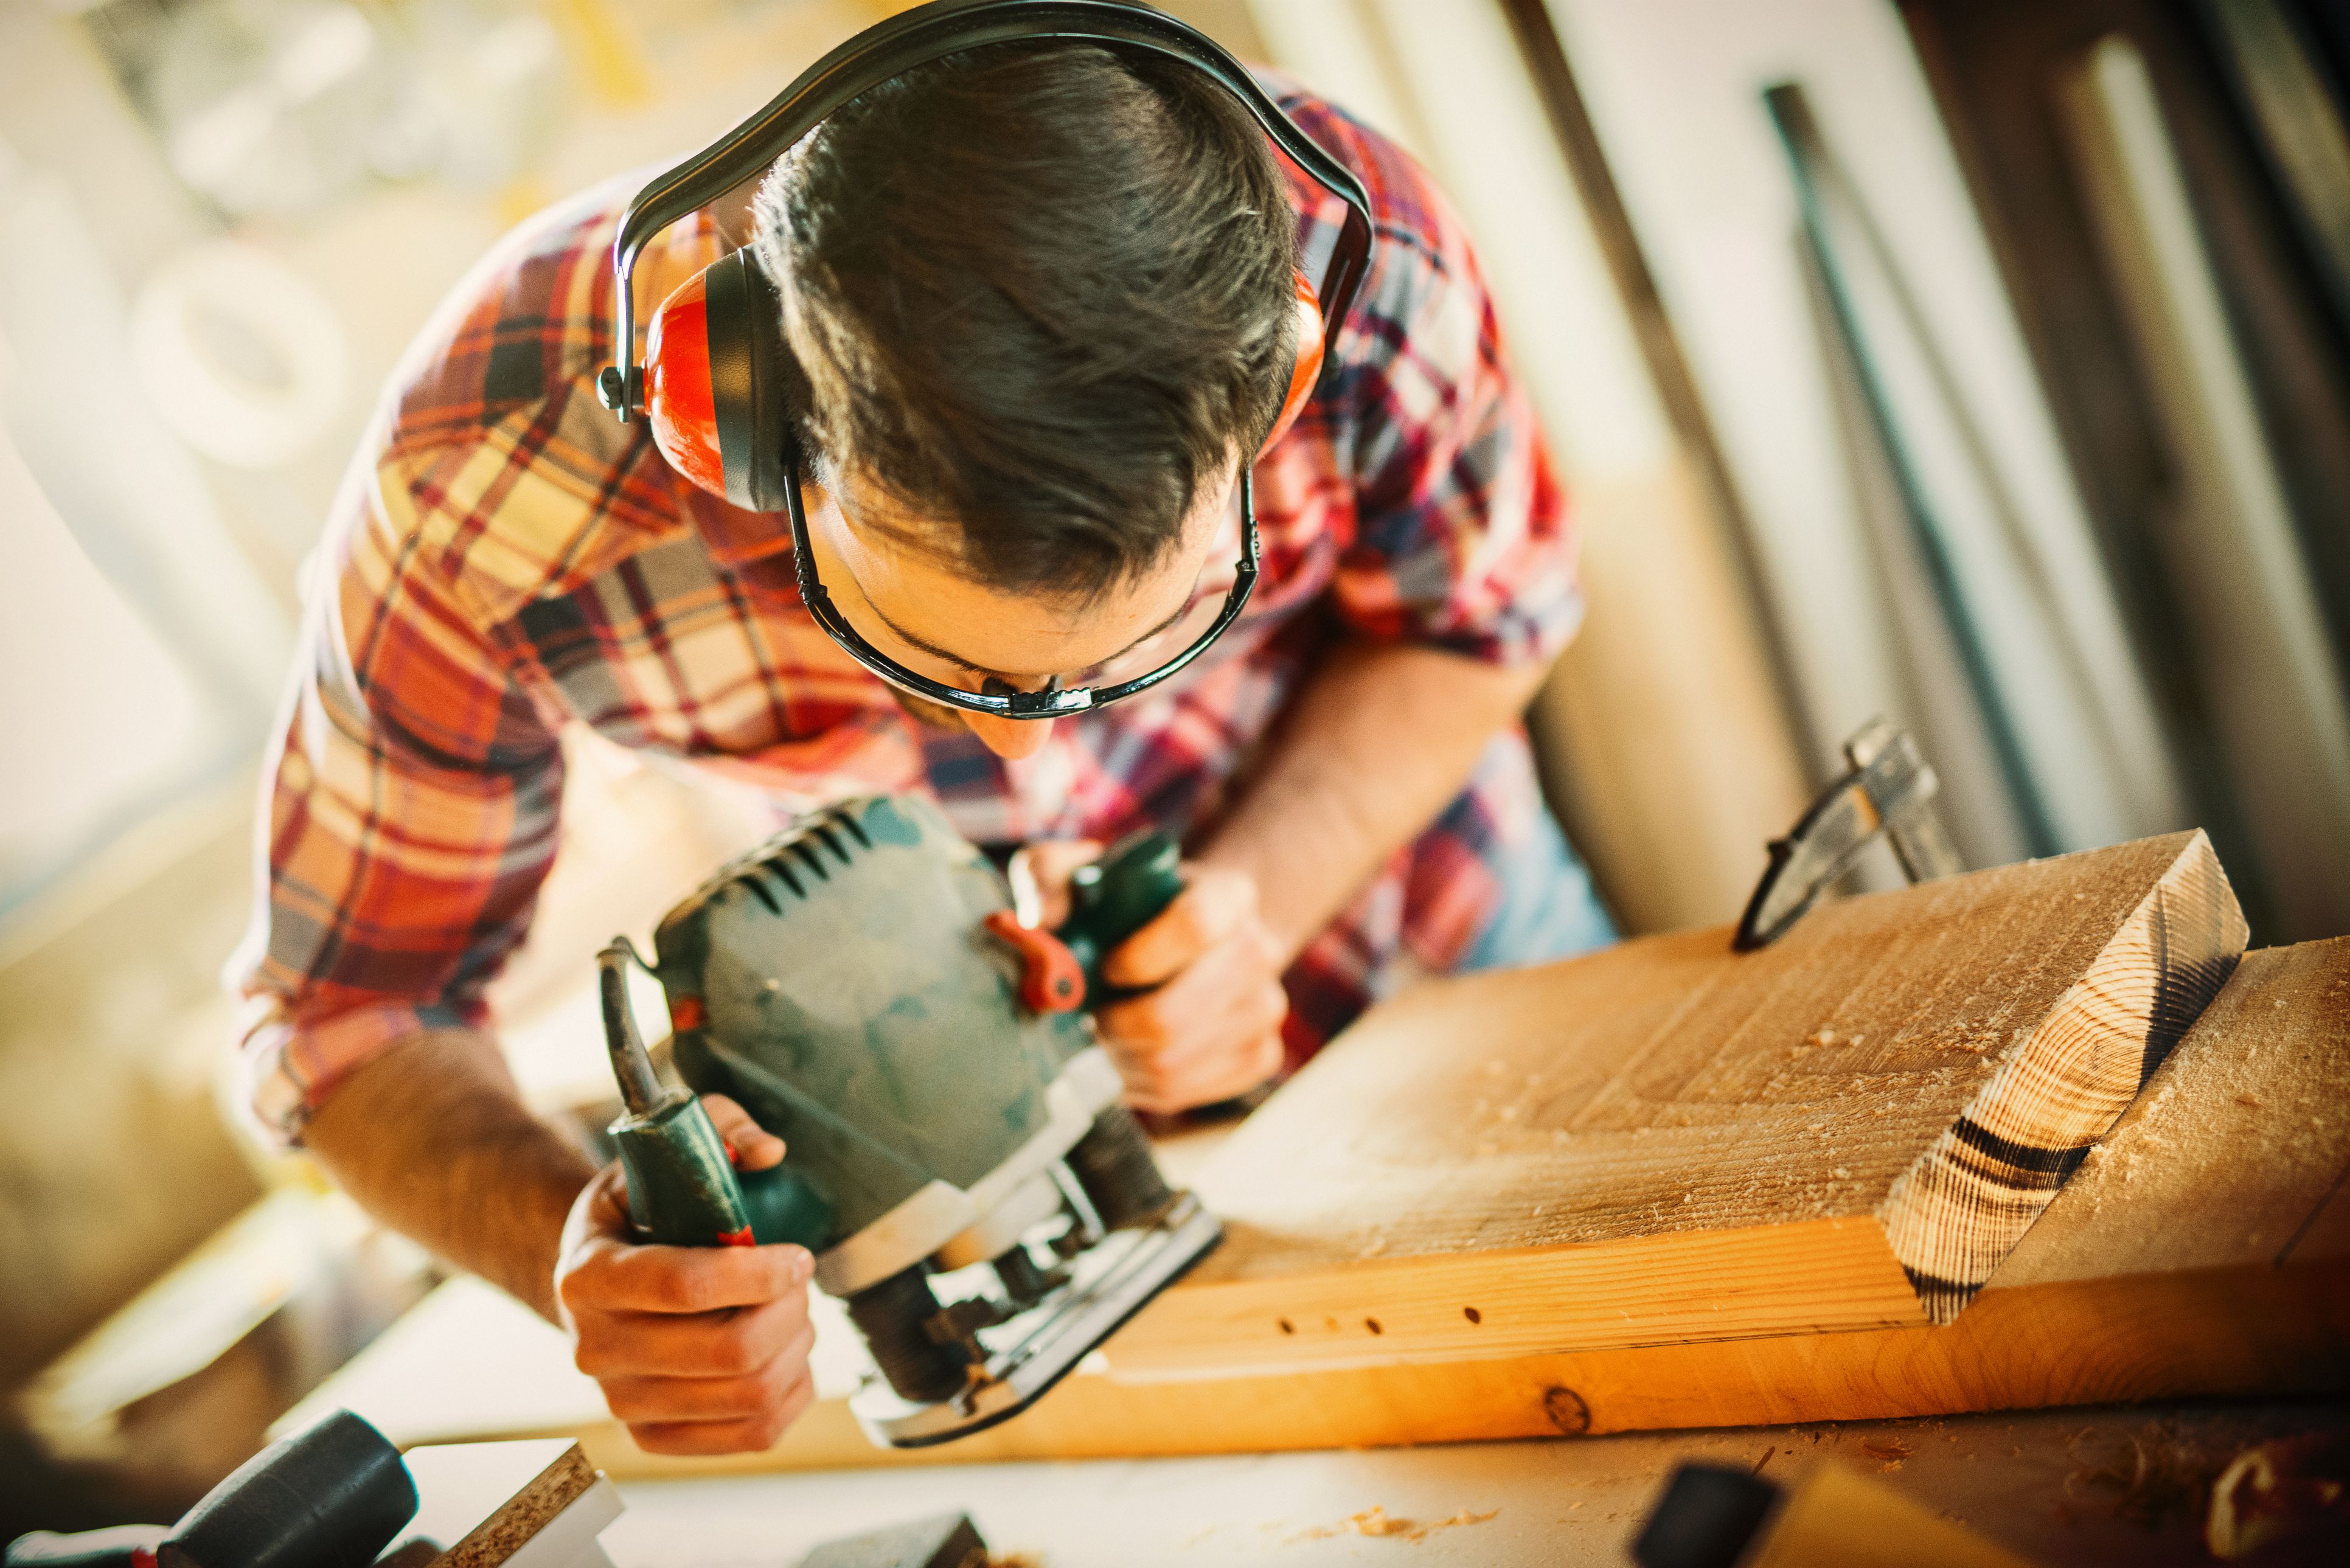 4 Tips for Operating Woodworking Machinery Safely